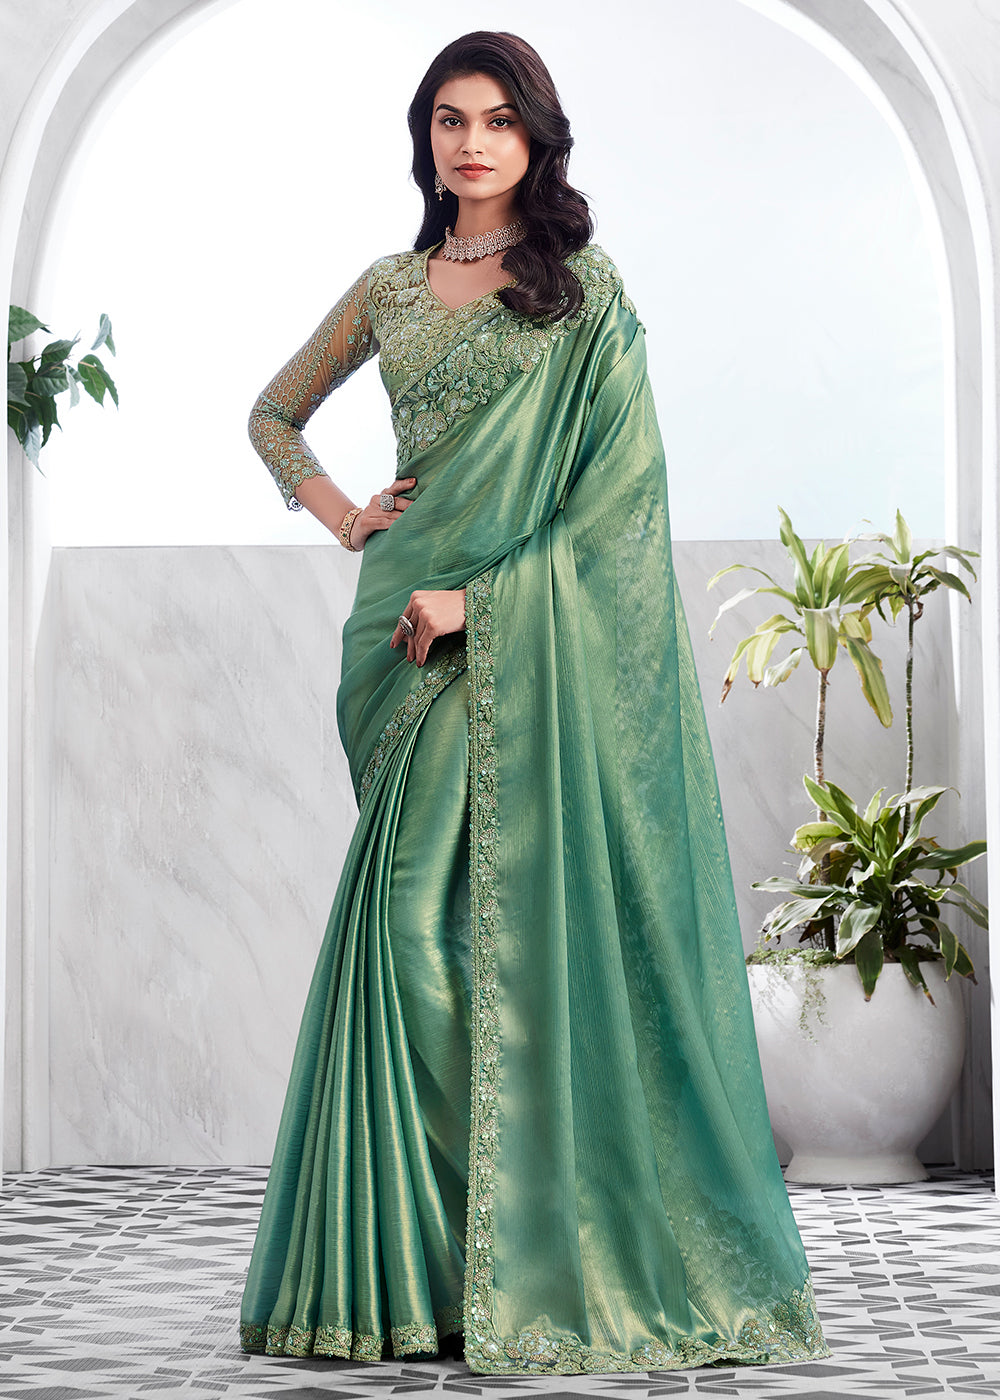 Buy Now Lovely Sea Green Silk Embroidered Designer Saree Online in USA, UK, Canada & Worldwide at Empress Clothing. 